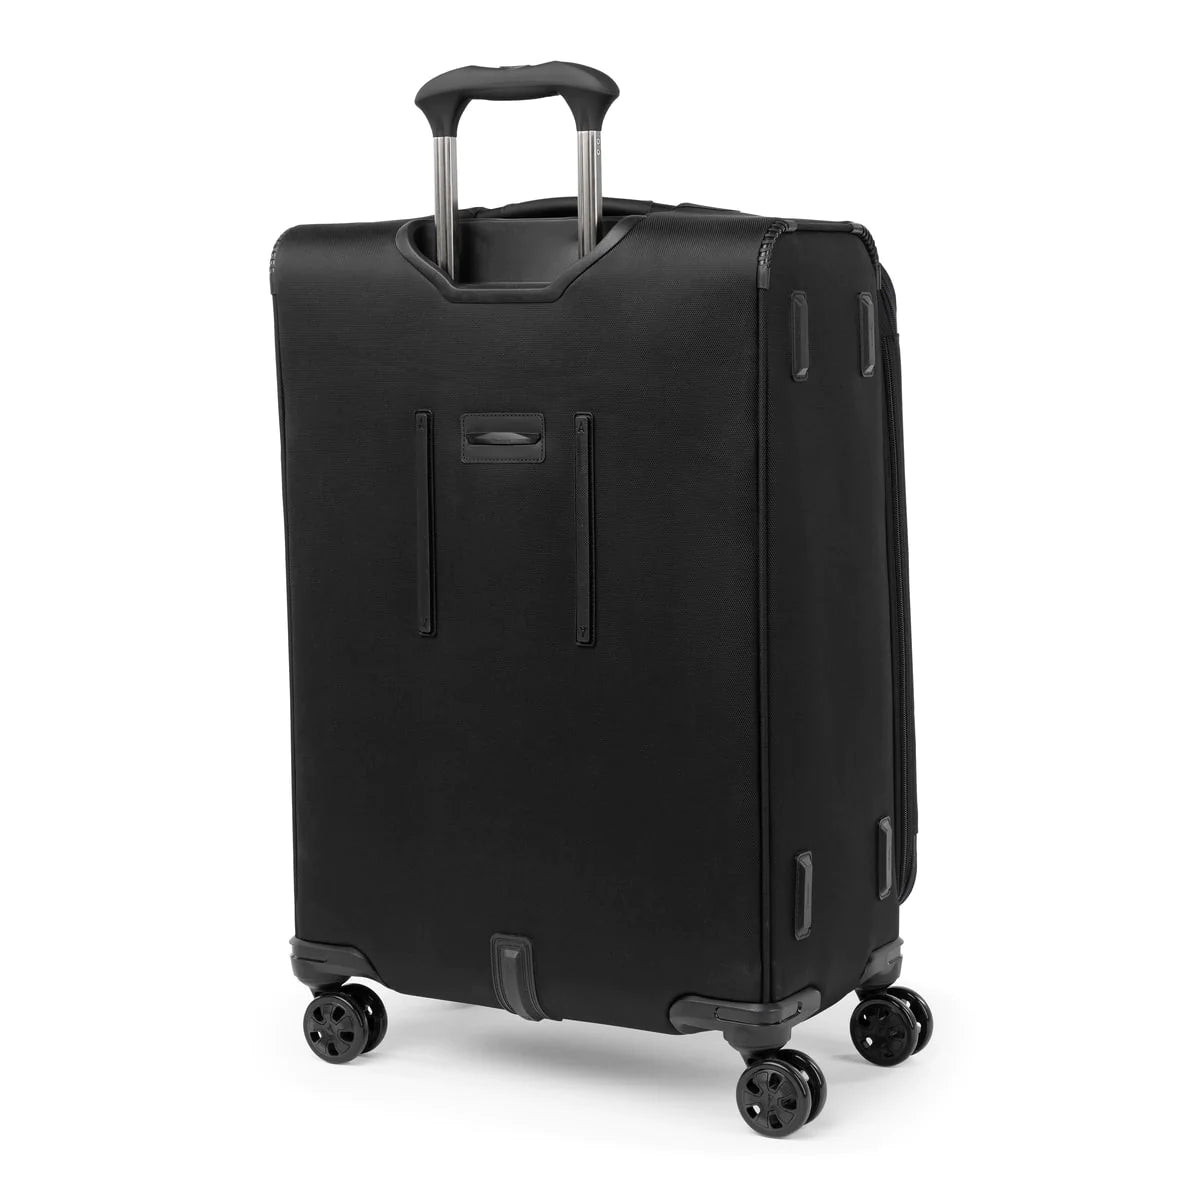 Travelpro Crew™ Classic Medium 25" Check-in Softside Spinner